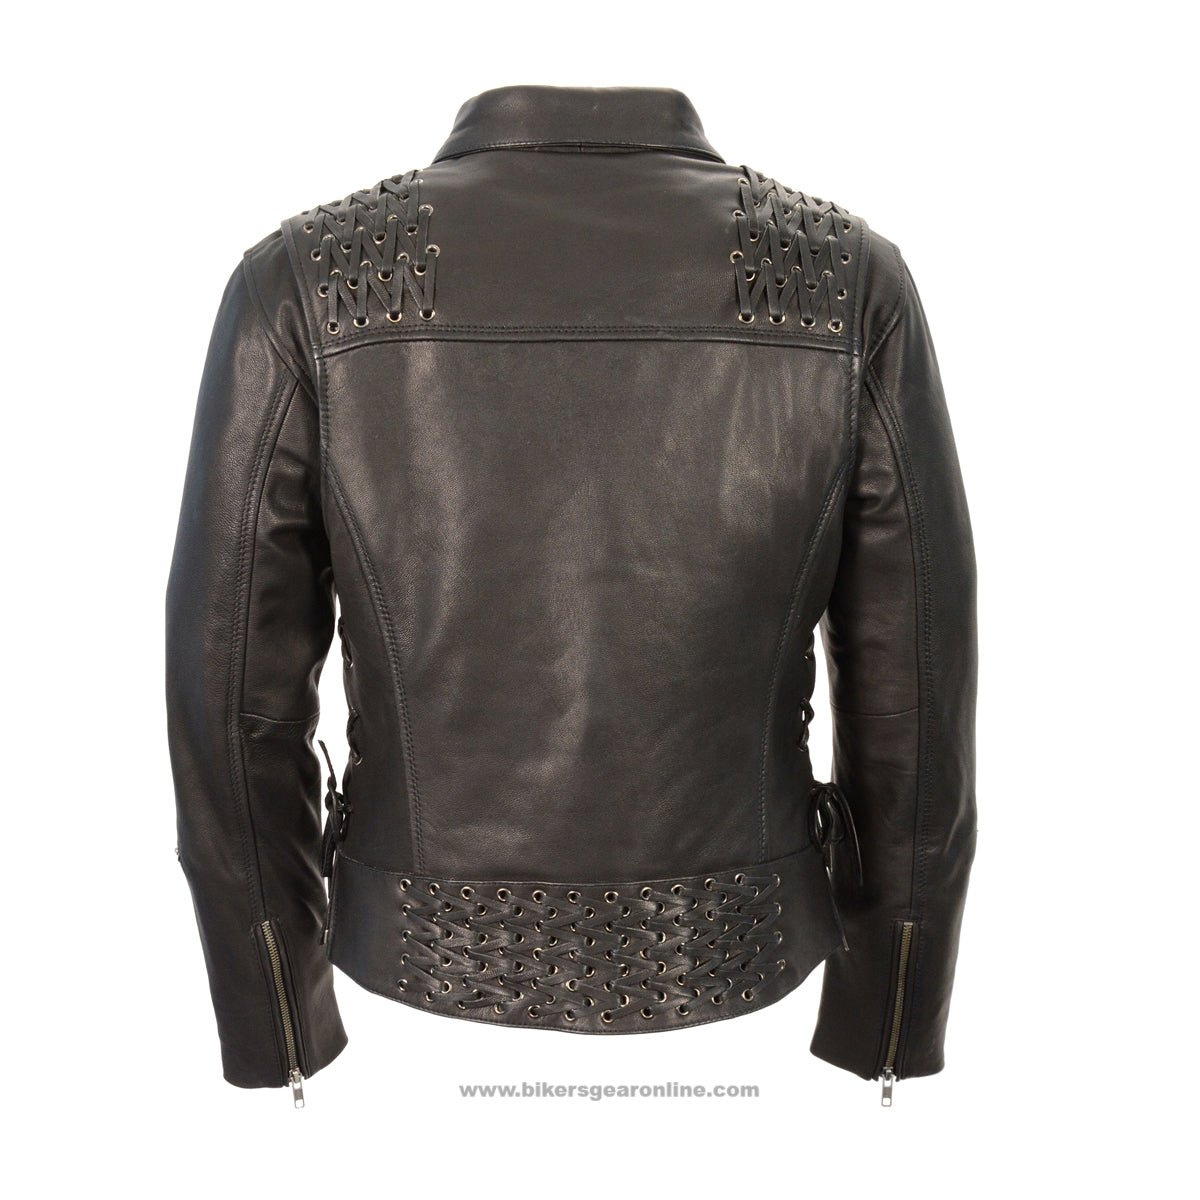 LADIES LIGHTWEIGHT MOTORCYCLE JACKET LACE TO LACE M/C JACKET